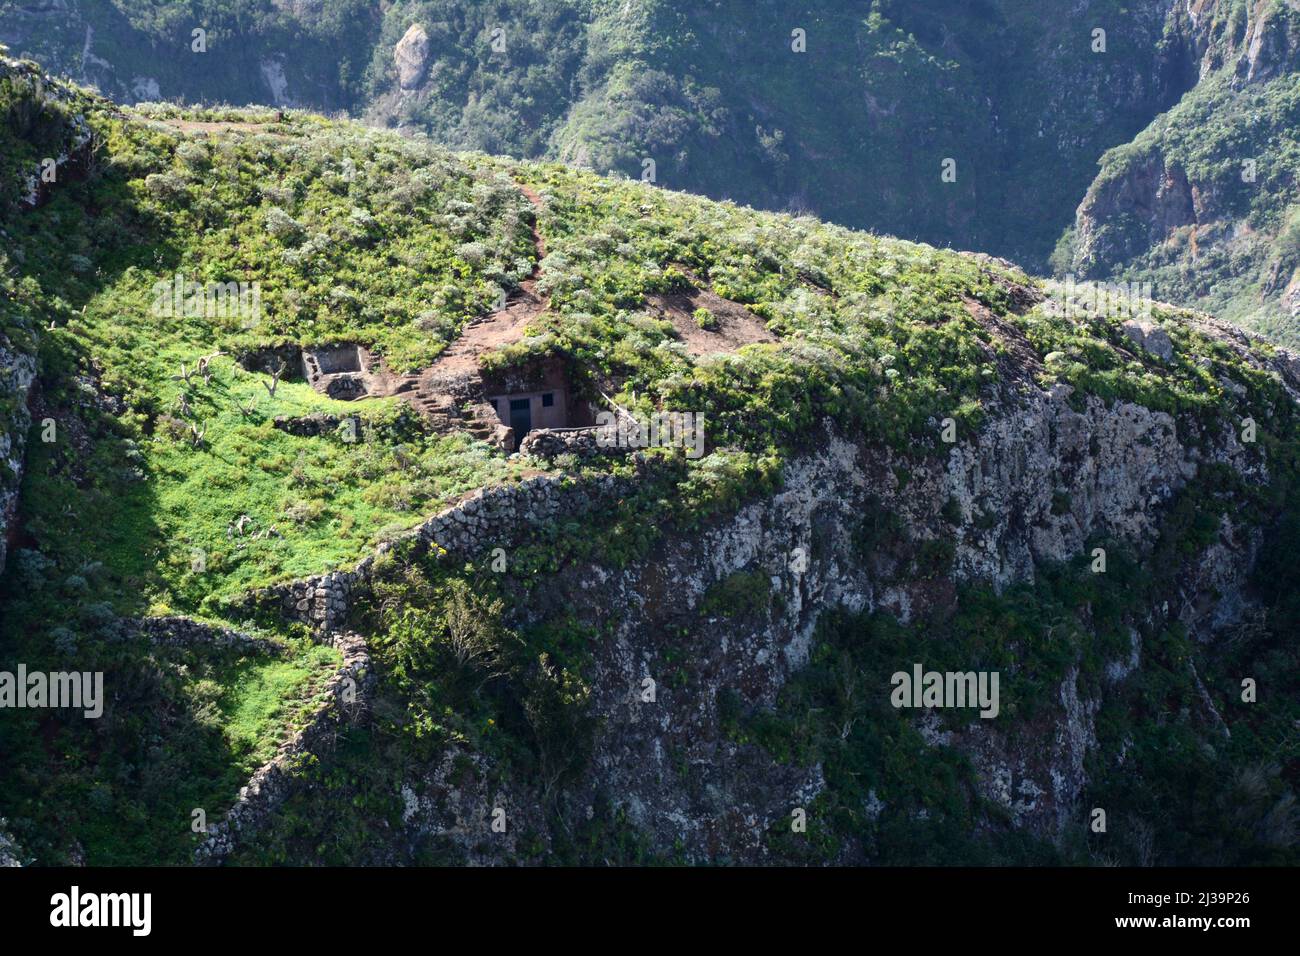 Old stone cave houses buried in a cliff face near the village of Taborno in the Anaga Mountains of Tenerife, Anaga Rural Park, Canary Islands, Spain. Stock Photo